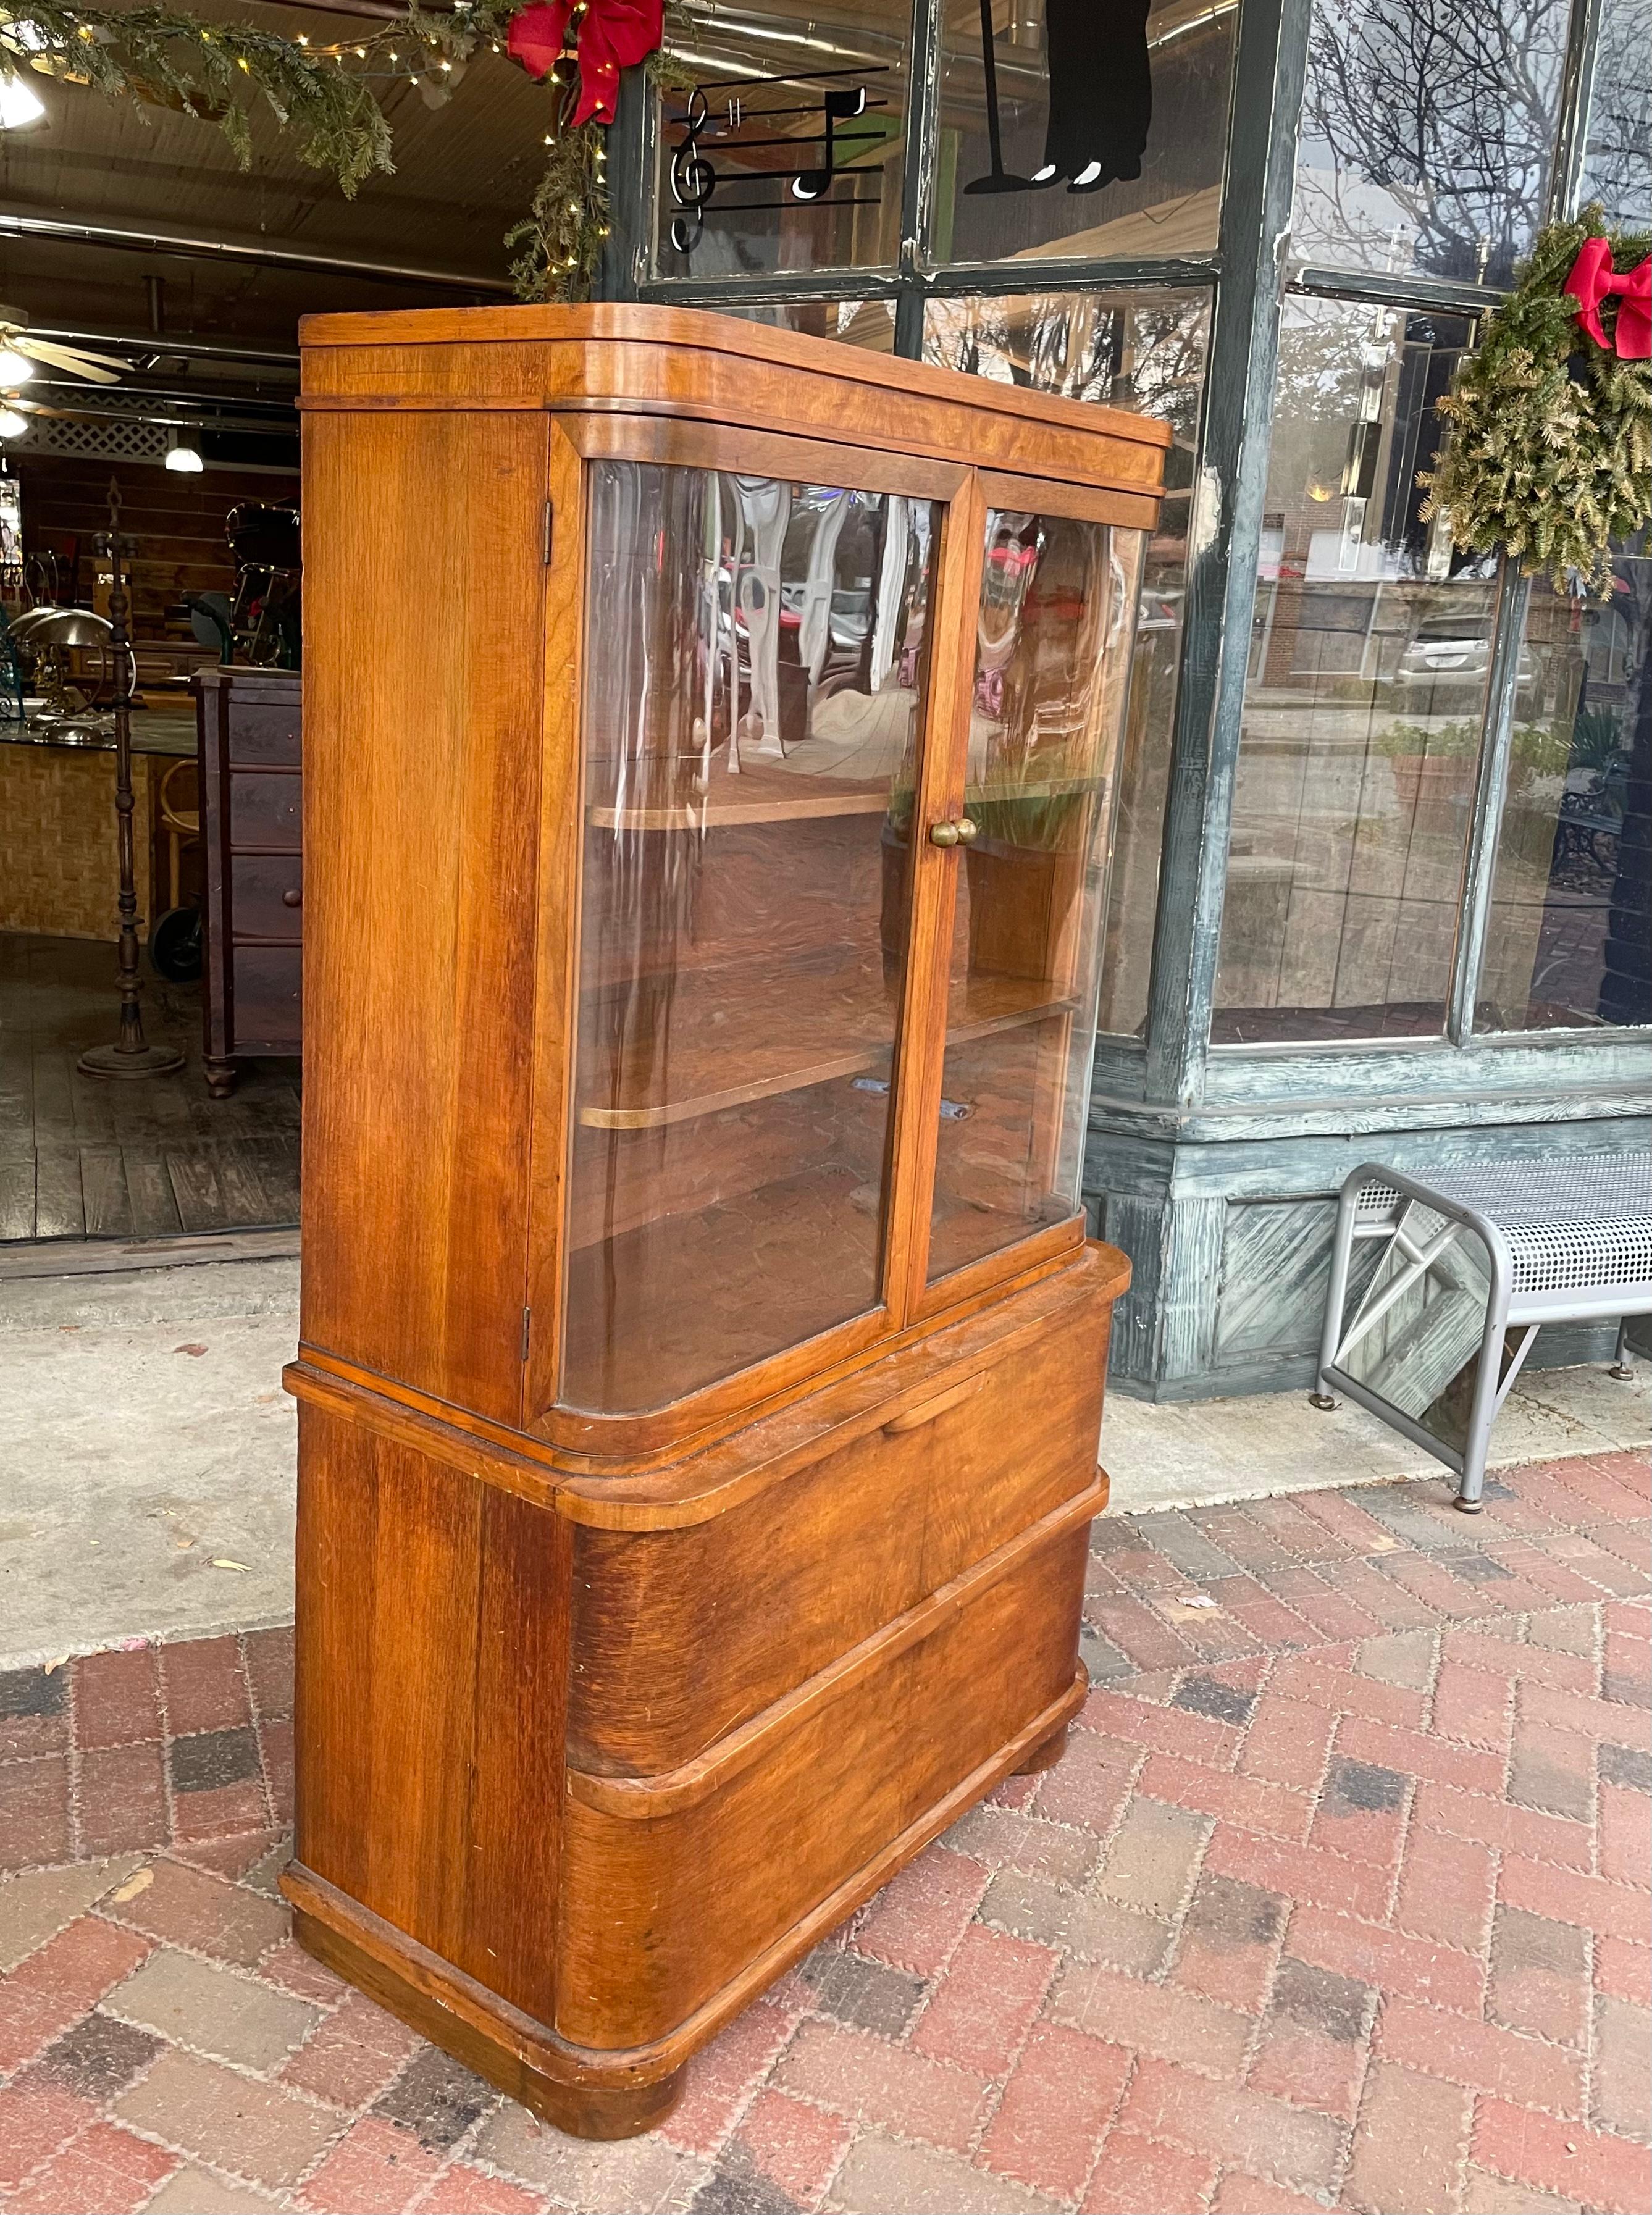 A genuine Art Deco Streamlined Moderne curved glass vitrine with matching rounded architectural features. This is a display cabinet in solid and veneered walnut with classic Art Moderne architecture. Features include a pair of large, deep lower